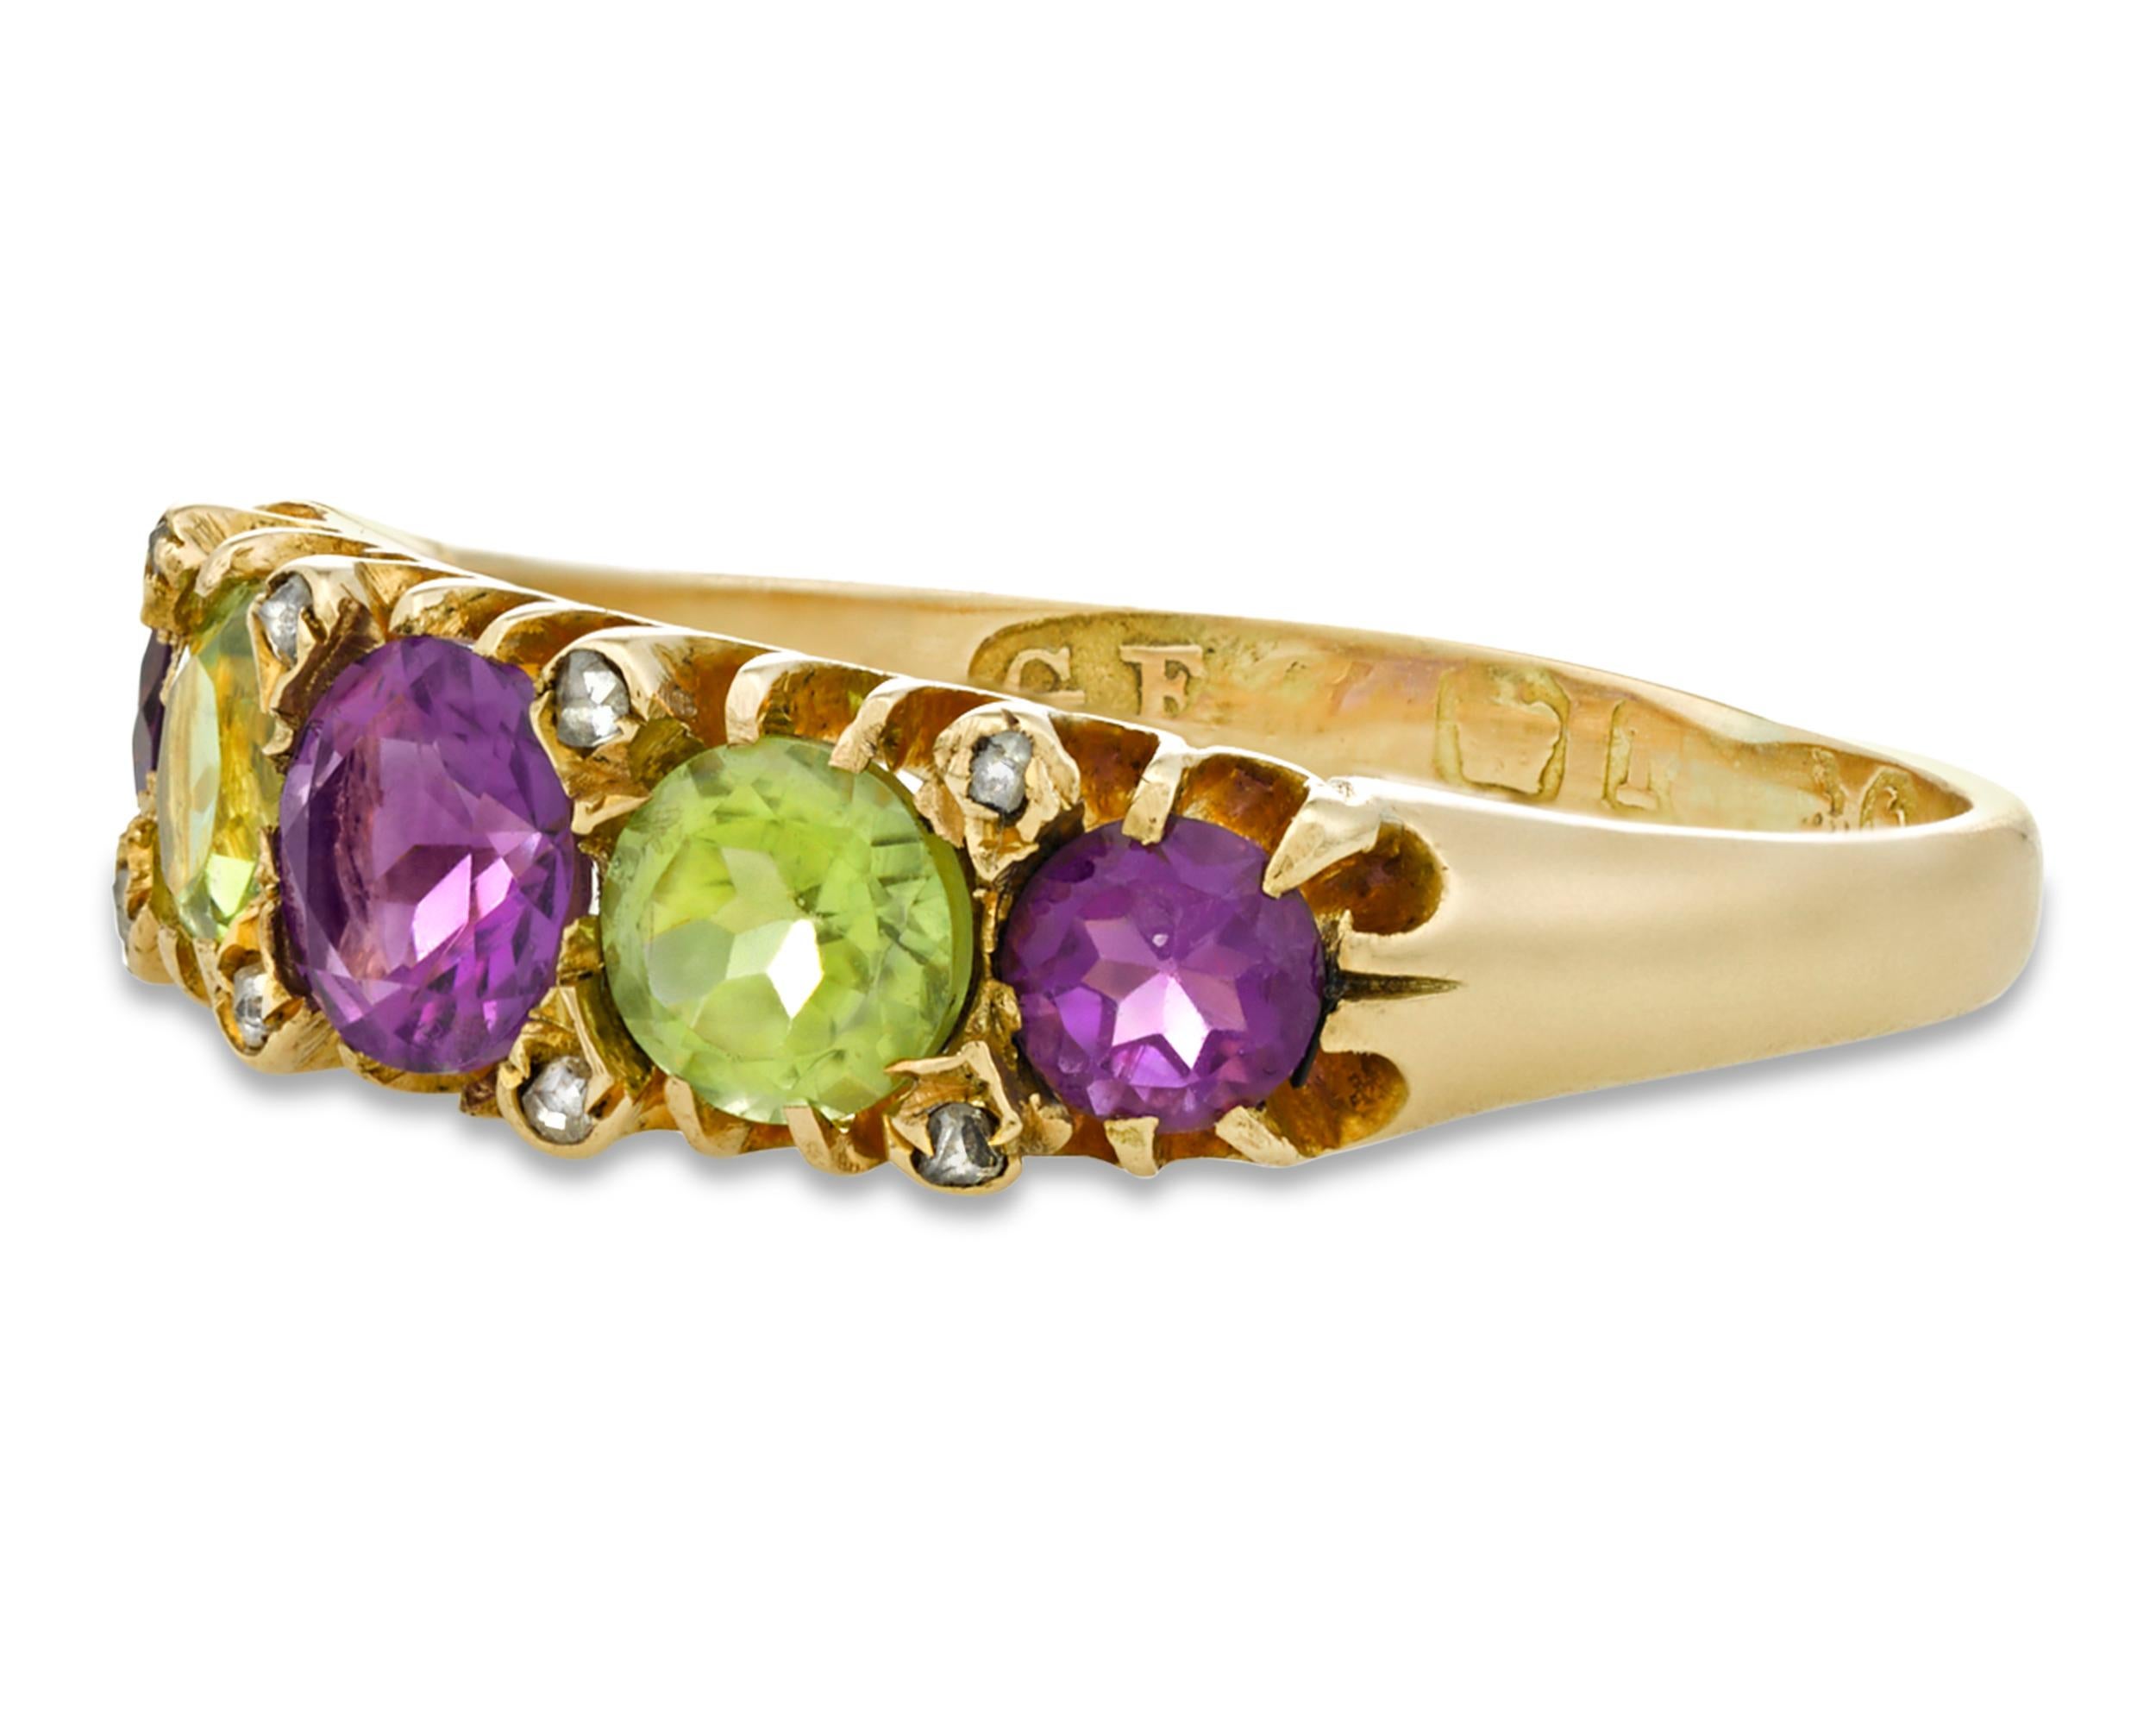 An exquisite antique ring with remarkable historical significance, this Edwardian work of jeweled art was worn by a British Suffragette to show her support for the movement. The official colors of the women's suffrage movement were green, white and